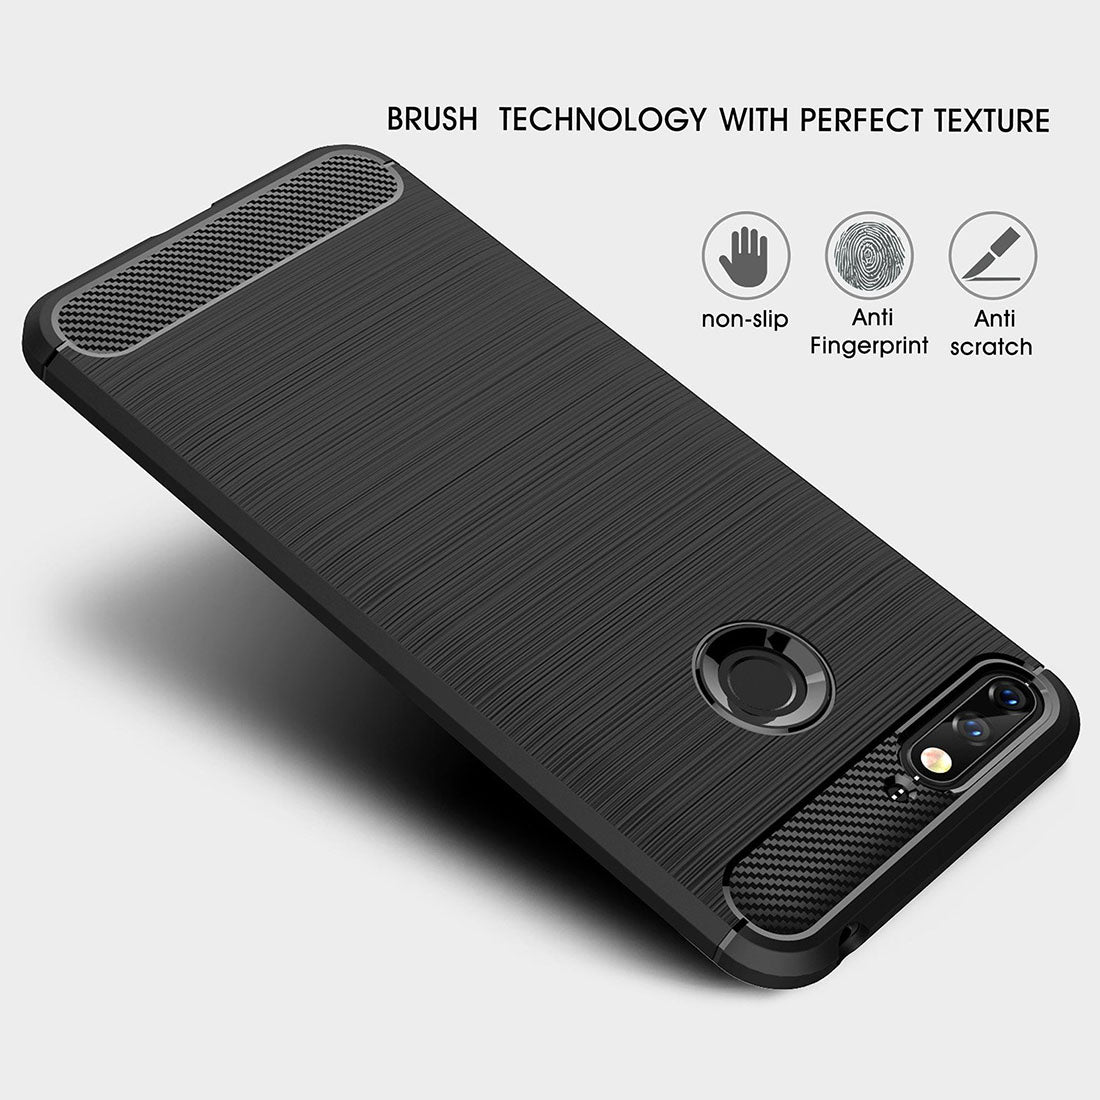 Carbon Fiber Case for Huawei Honor 7A